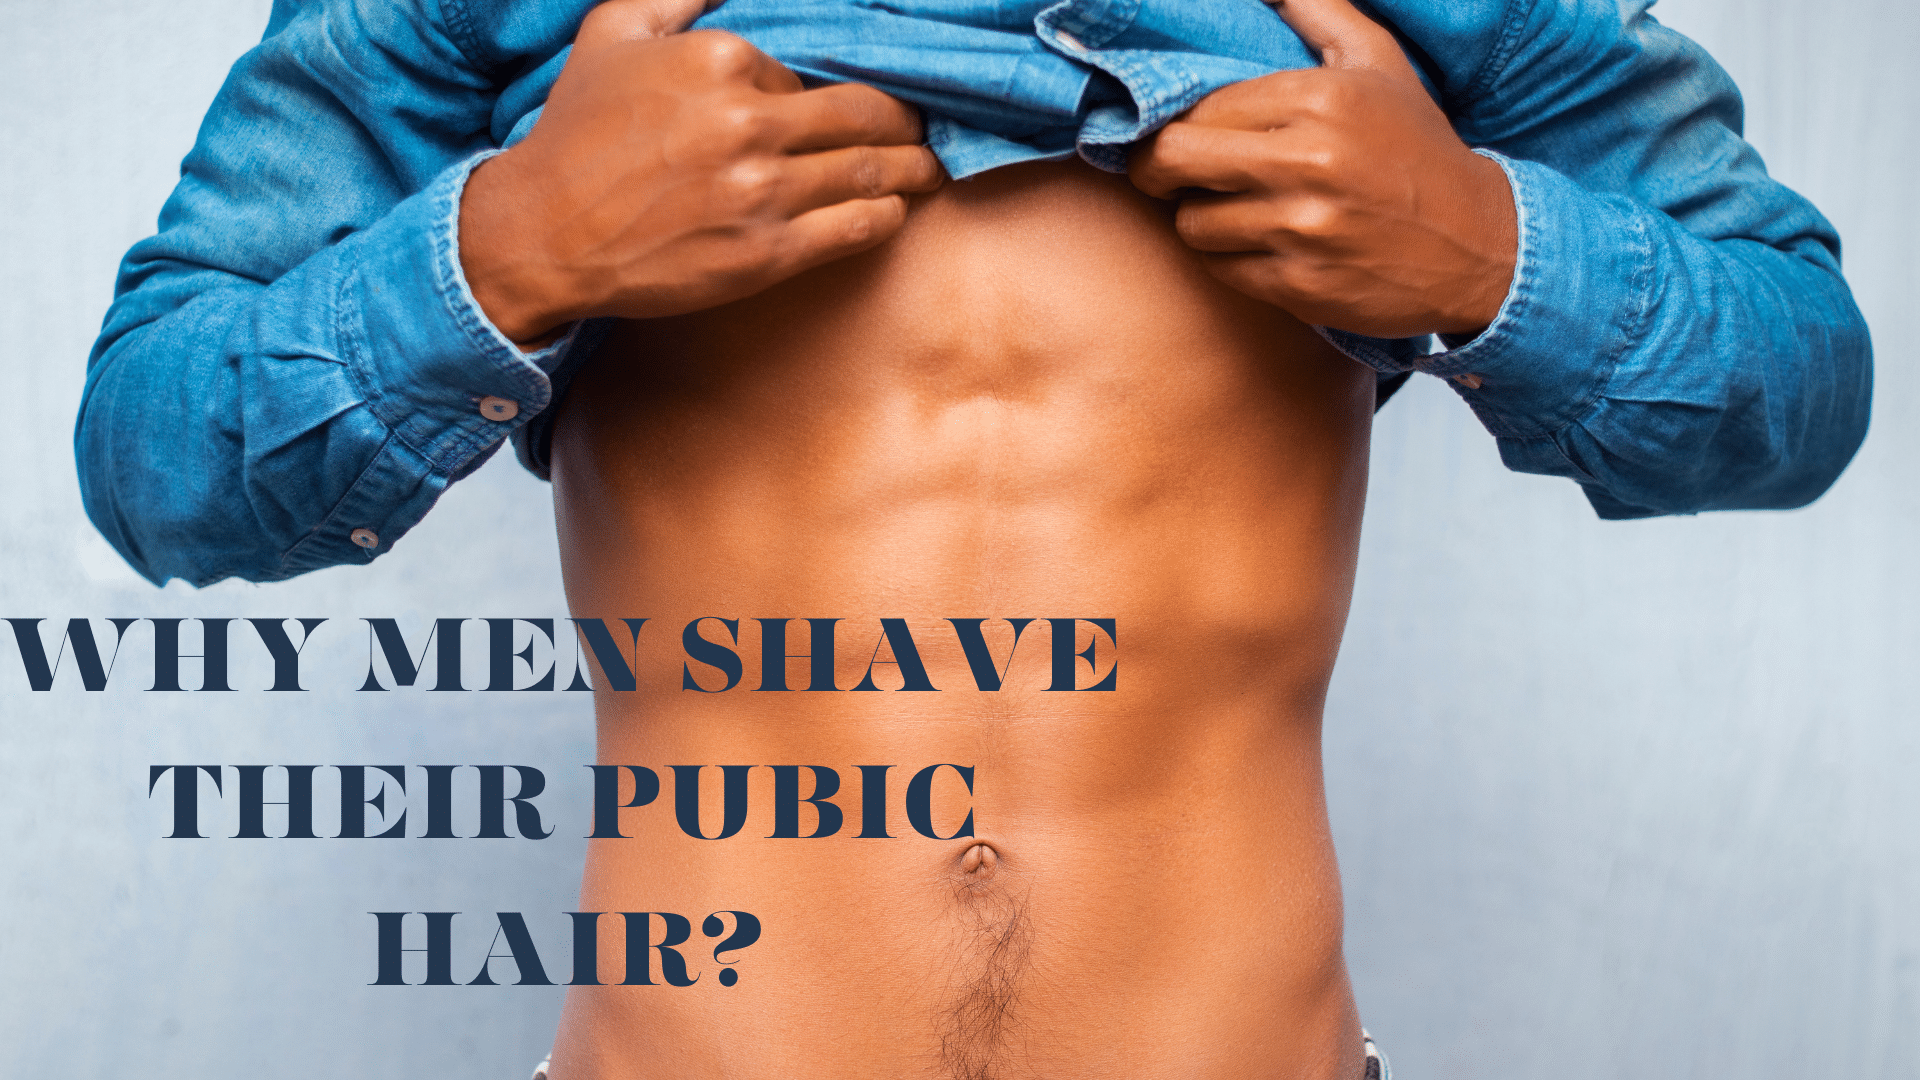 Male Pubic Hair Removal